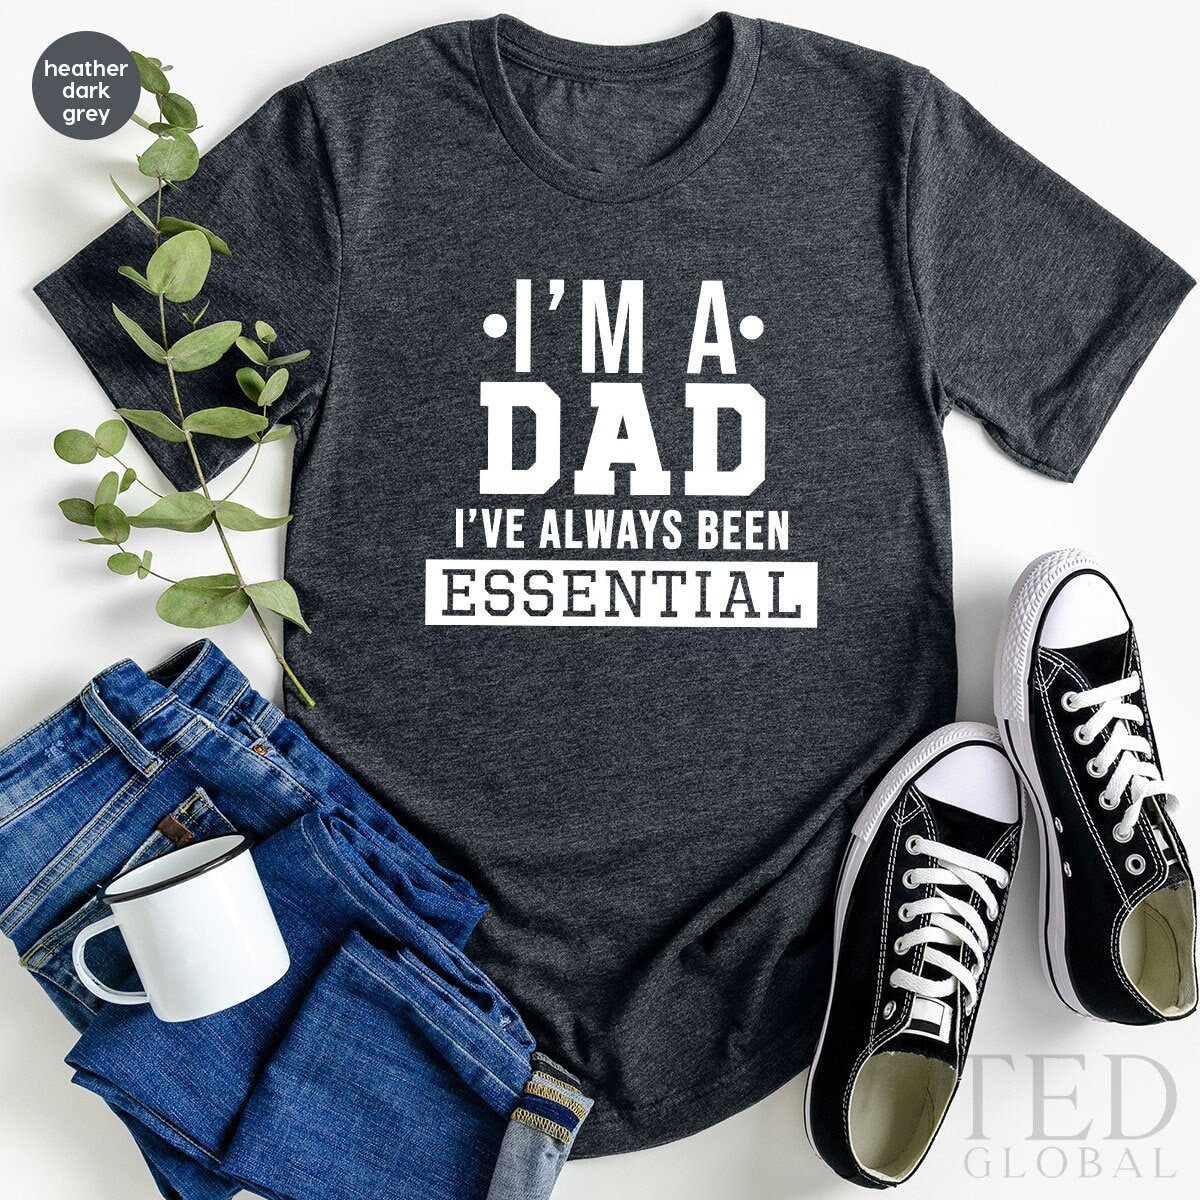 Essential Dad Shirt, Fathers Day Tee, Fathers Day Gifts, New Dad Shirt, Nurse Dad Shirt, I'm Essential Shirt, Gift For Dad, Gift For Husband - Fastdeliverytees.com